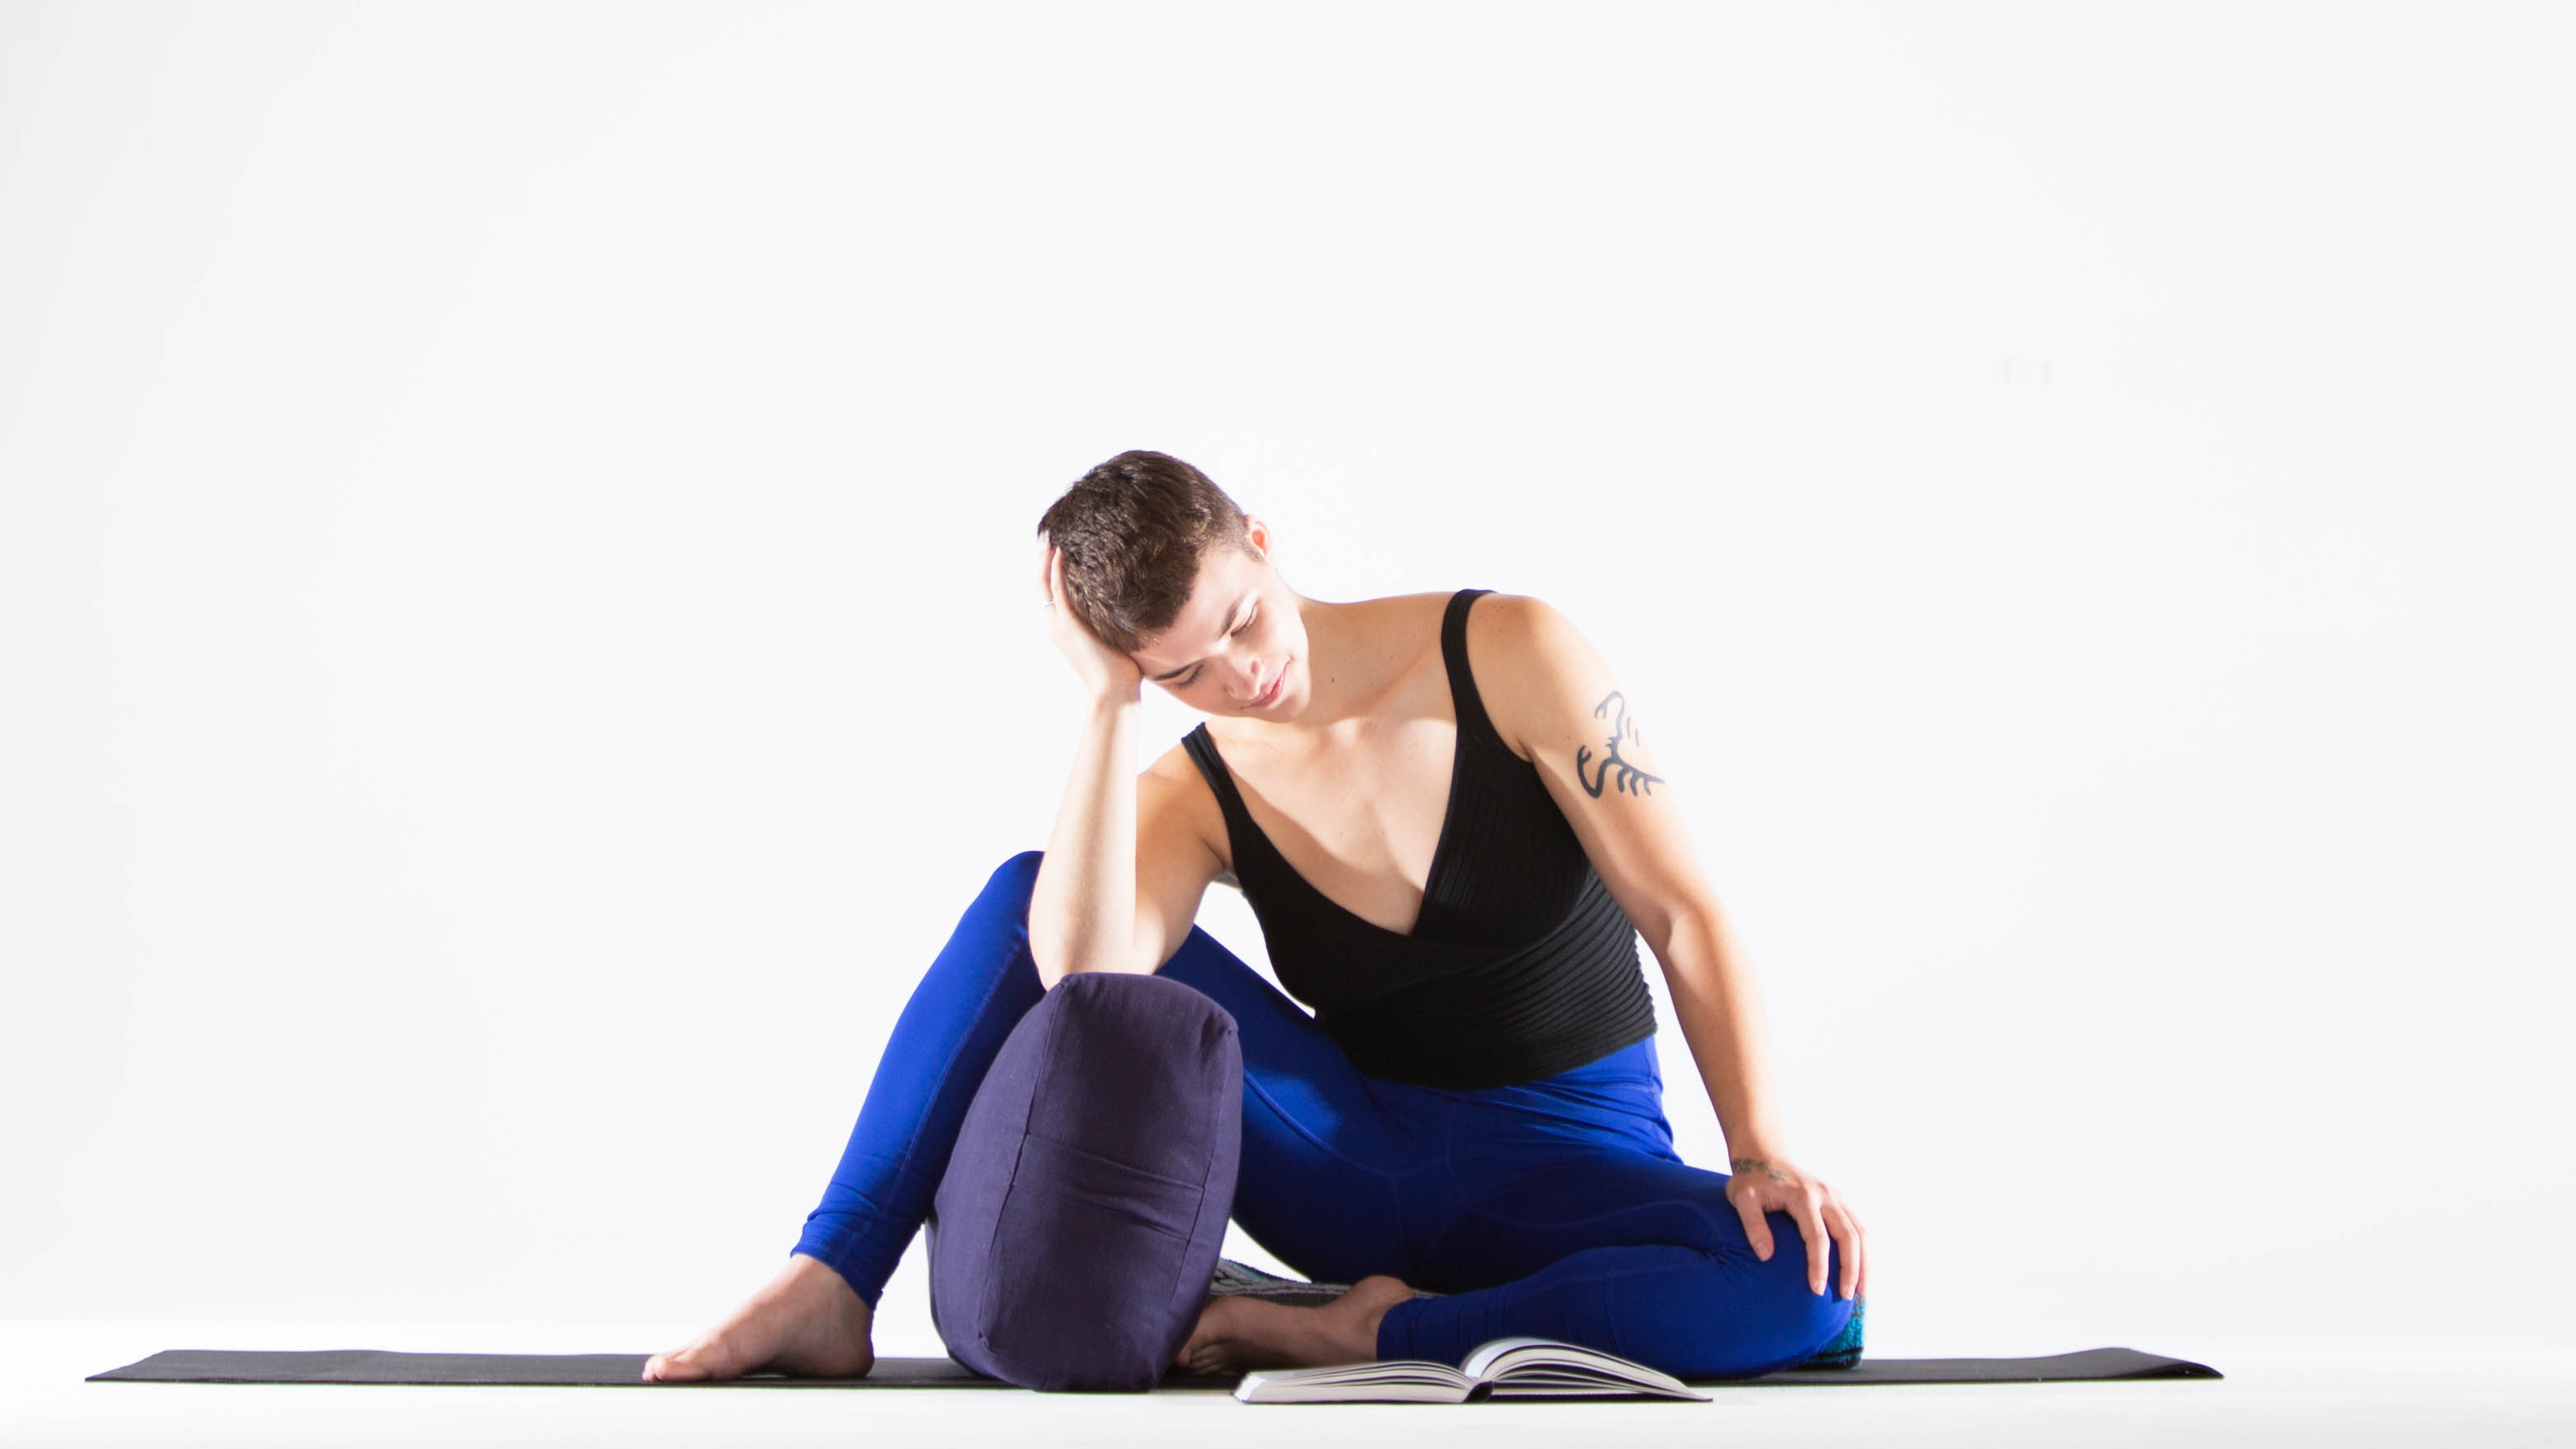 One Simple Setup: A Restorative Yoga Sequence Without Tons of Props